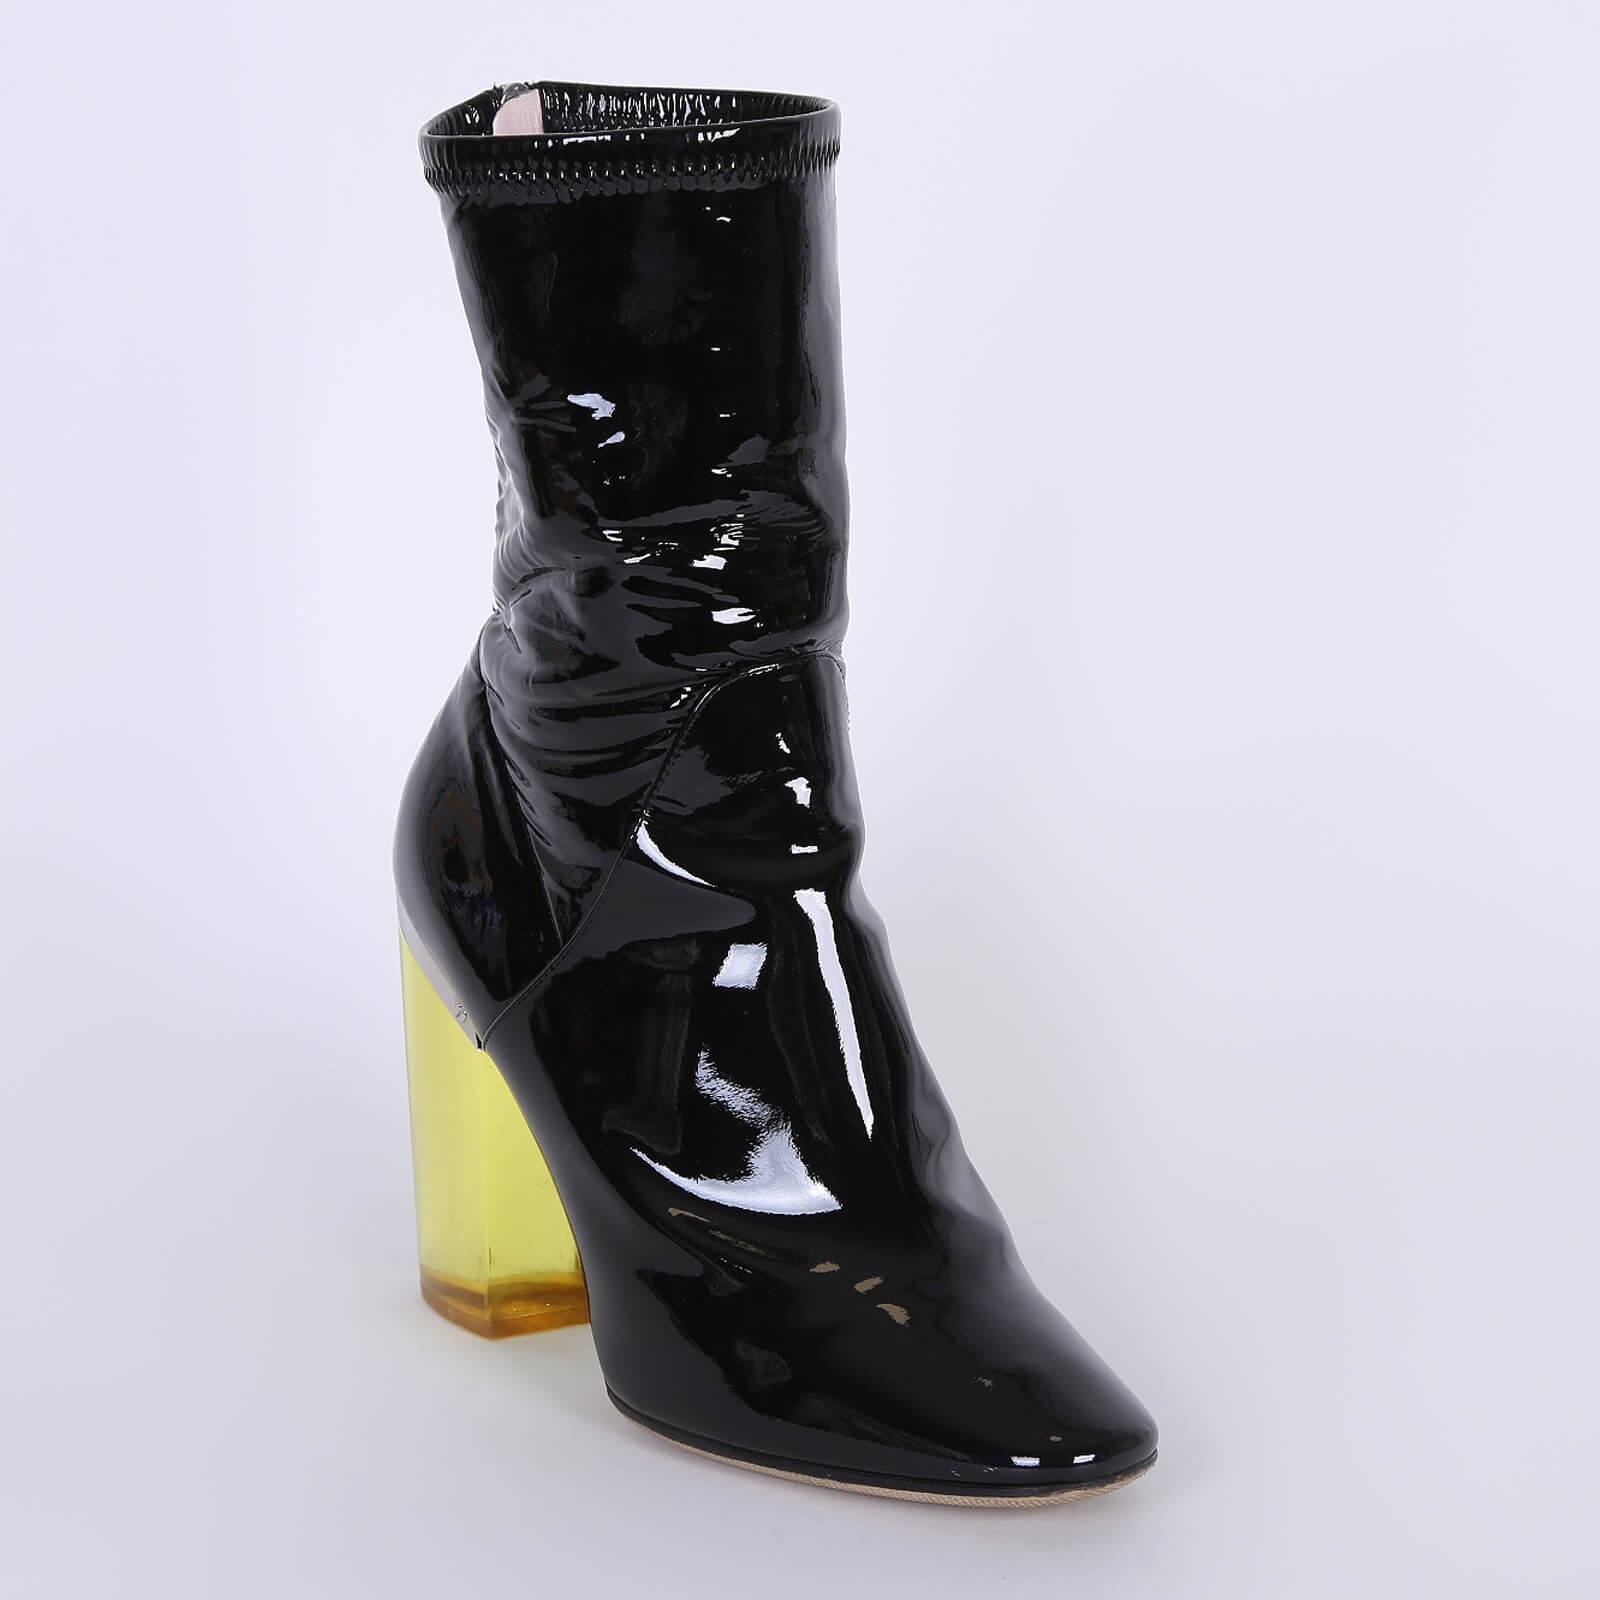 CHRISTIAN DIOR Latex Patent Leather Transparent Heel Ankle Boots Noir 40